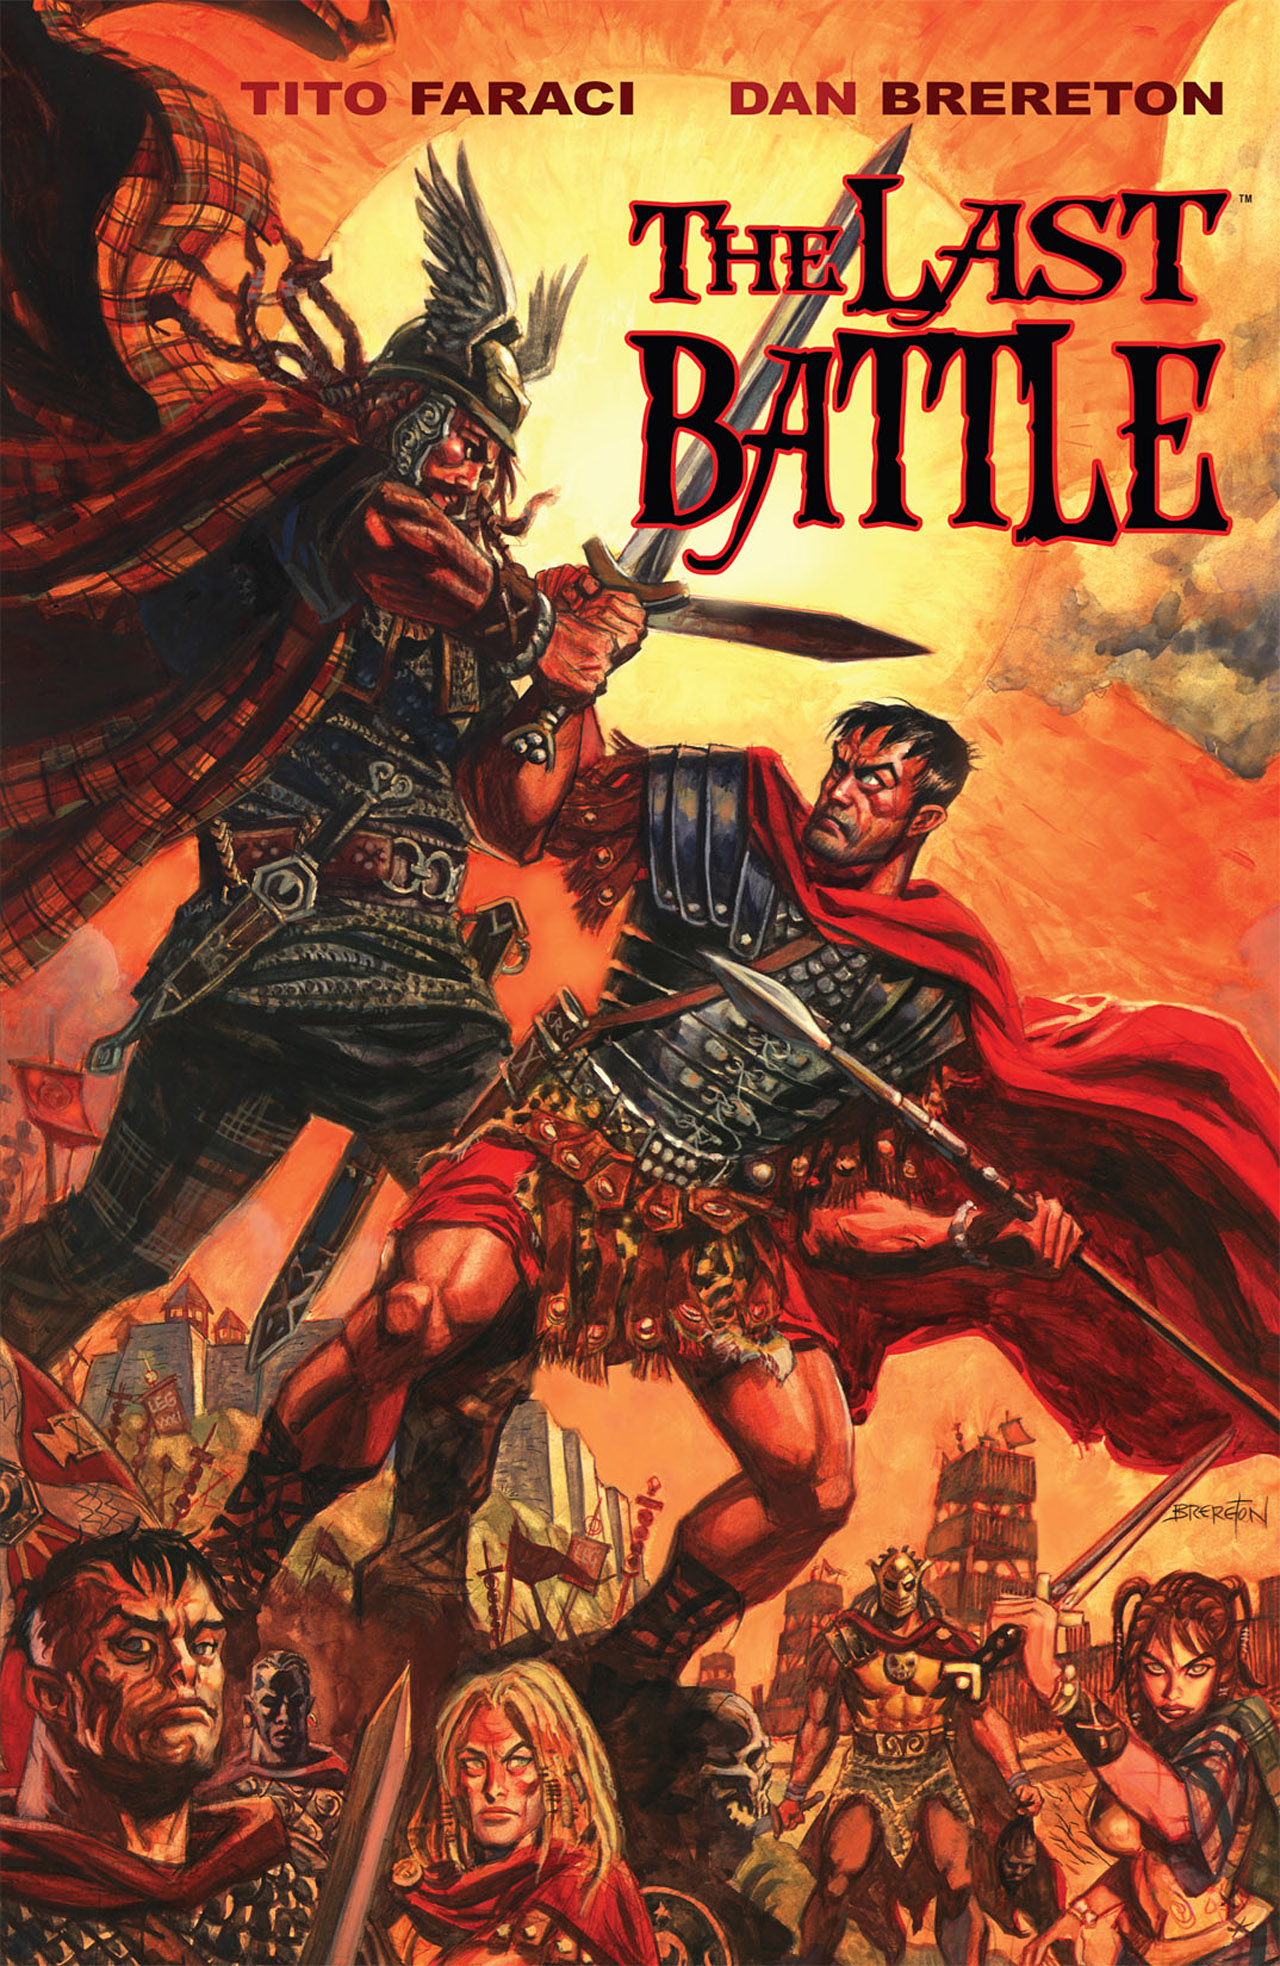 Read online The Last Battle comic -  Issue # TPB - 1